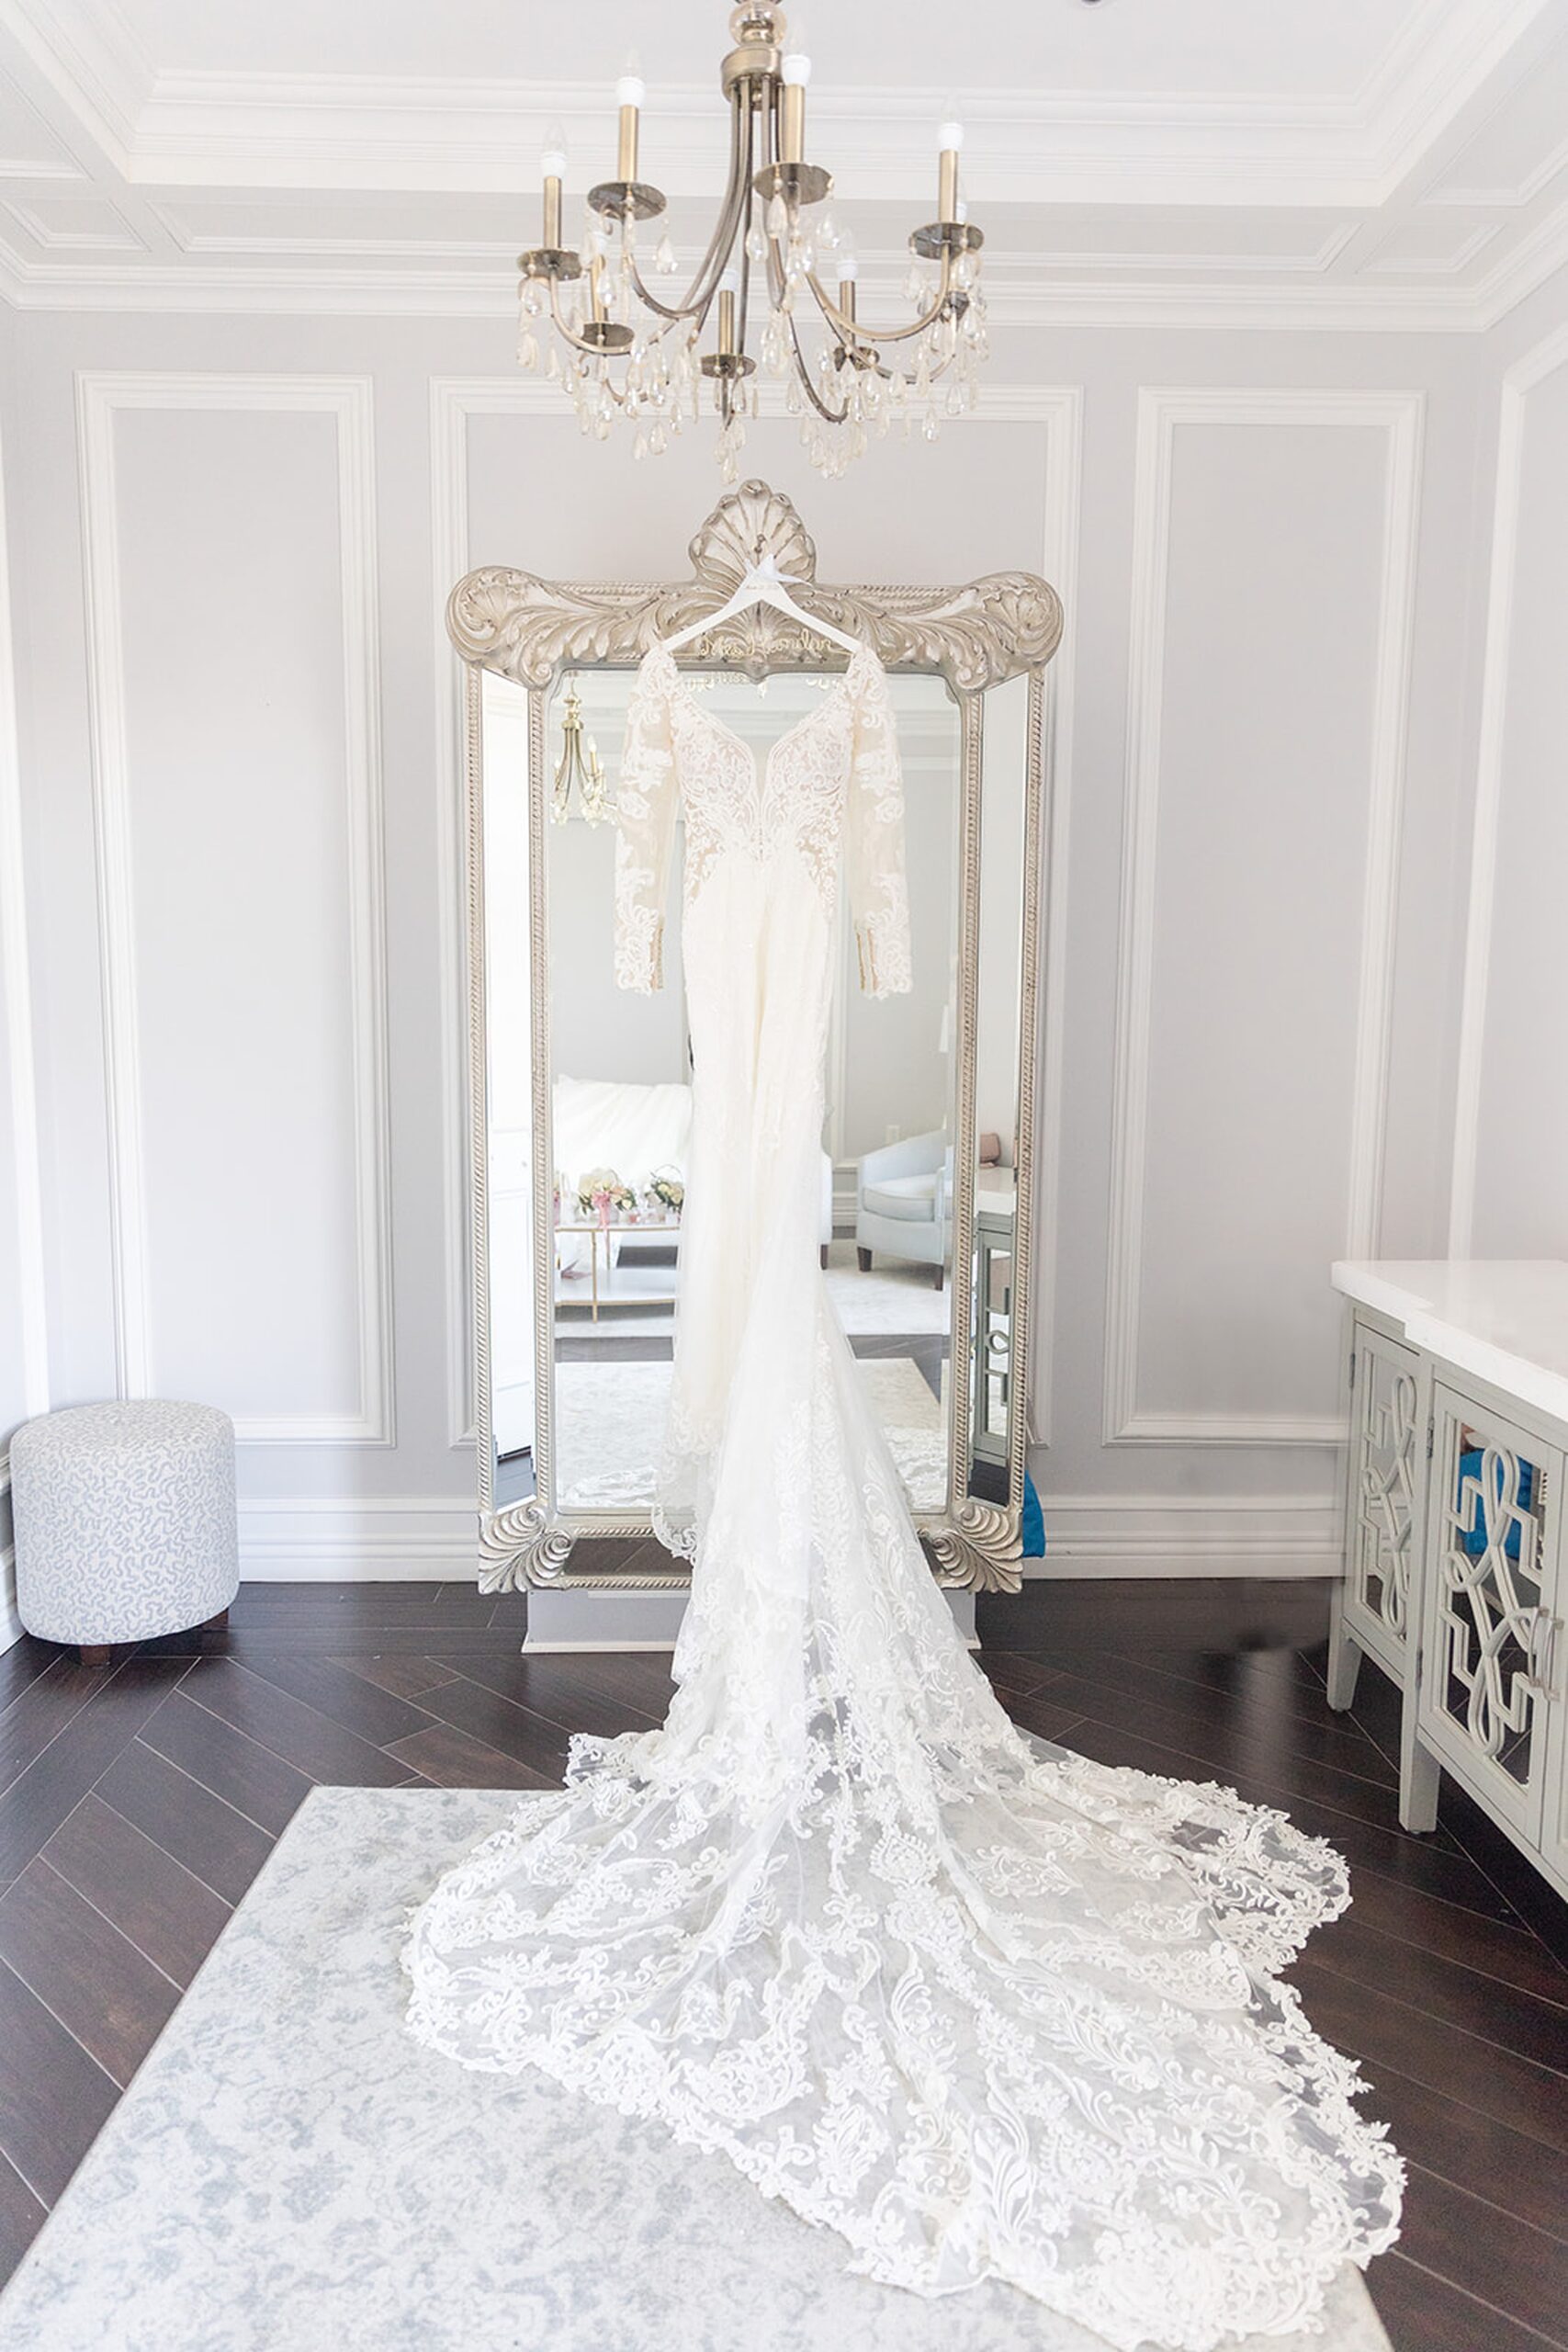 A wedding dress with a long lace train hangs from a large ornate mirror under a chandelier